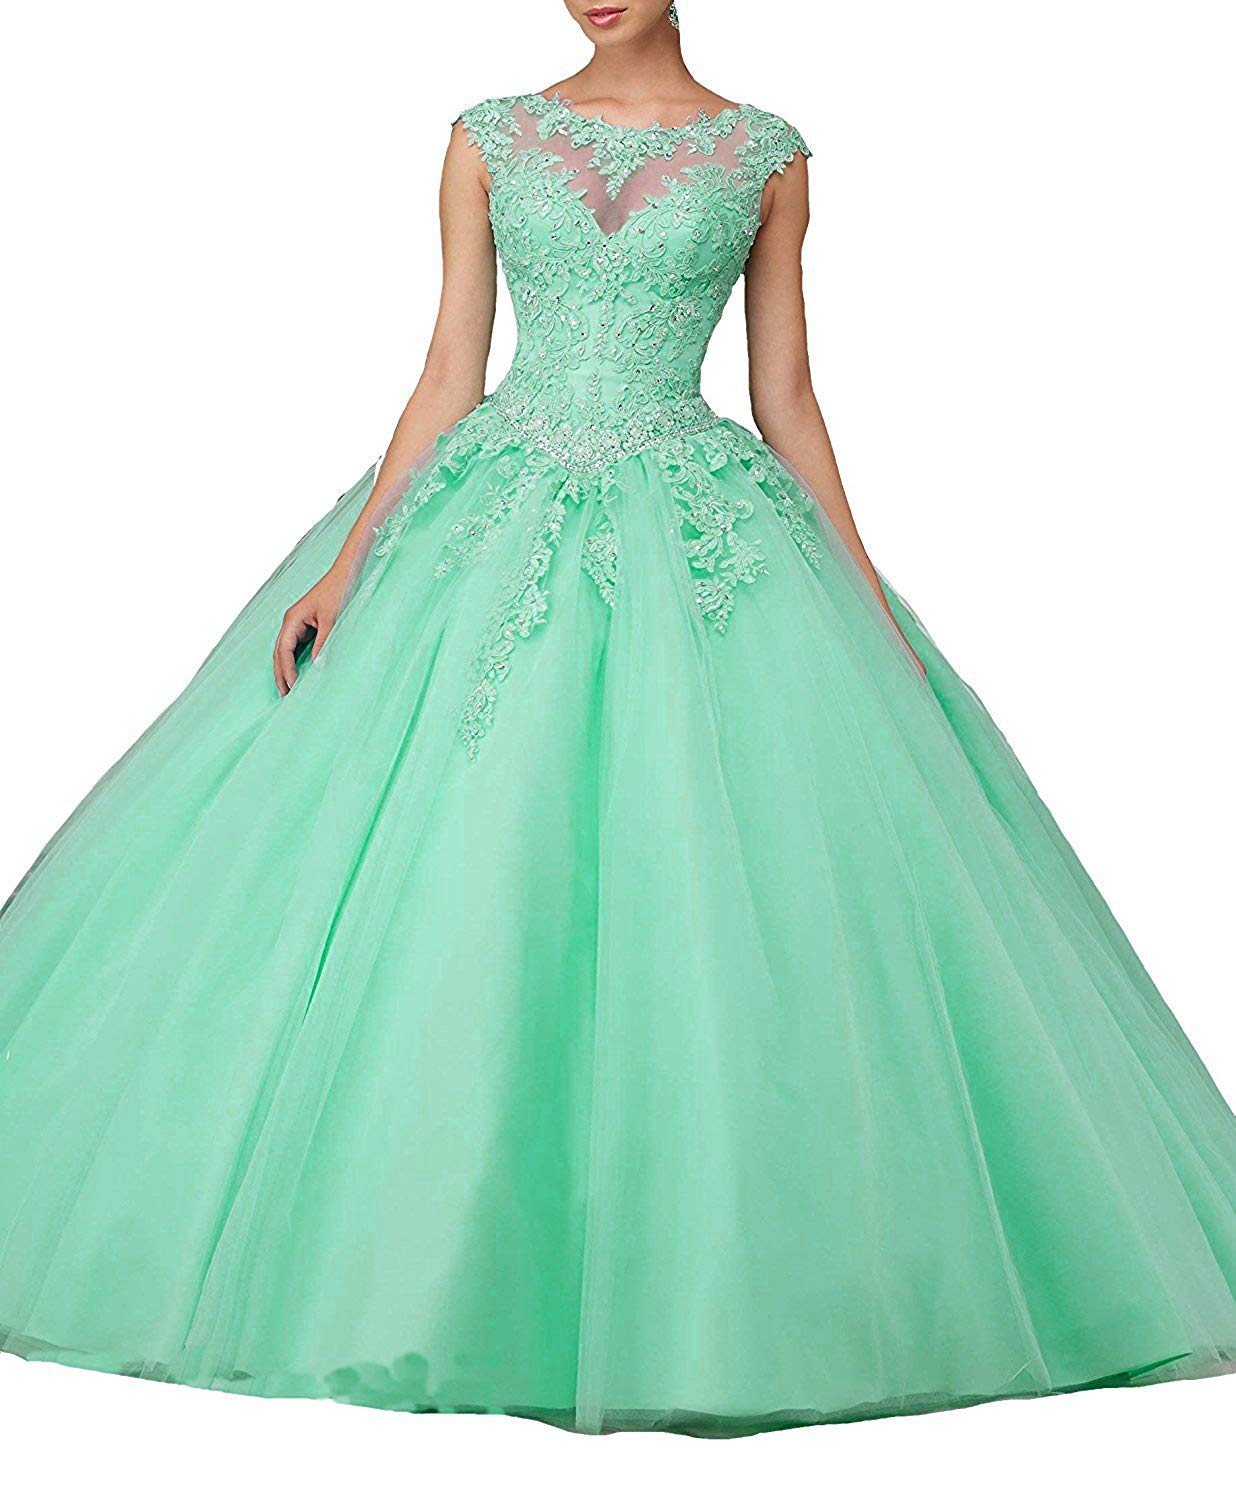 Load image into Gallery viewer, Quinceañera Beaded Scoop Neck Lace Sweet 16 Birthday Dress
